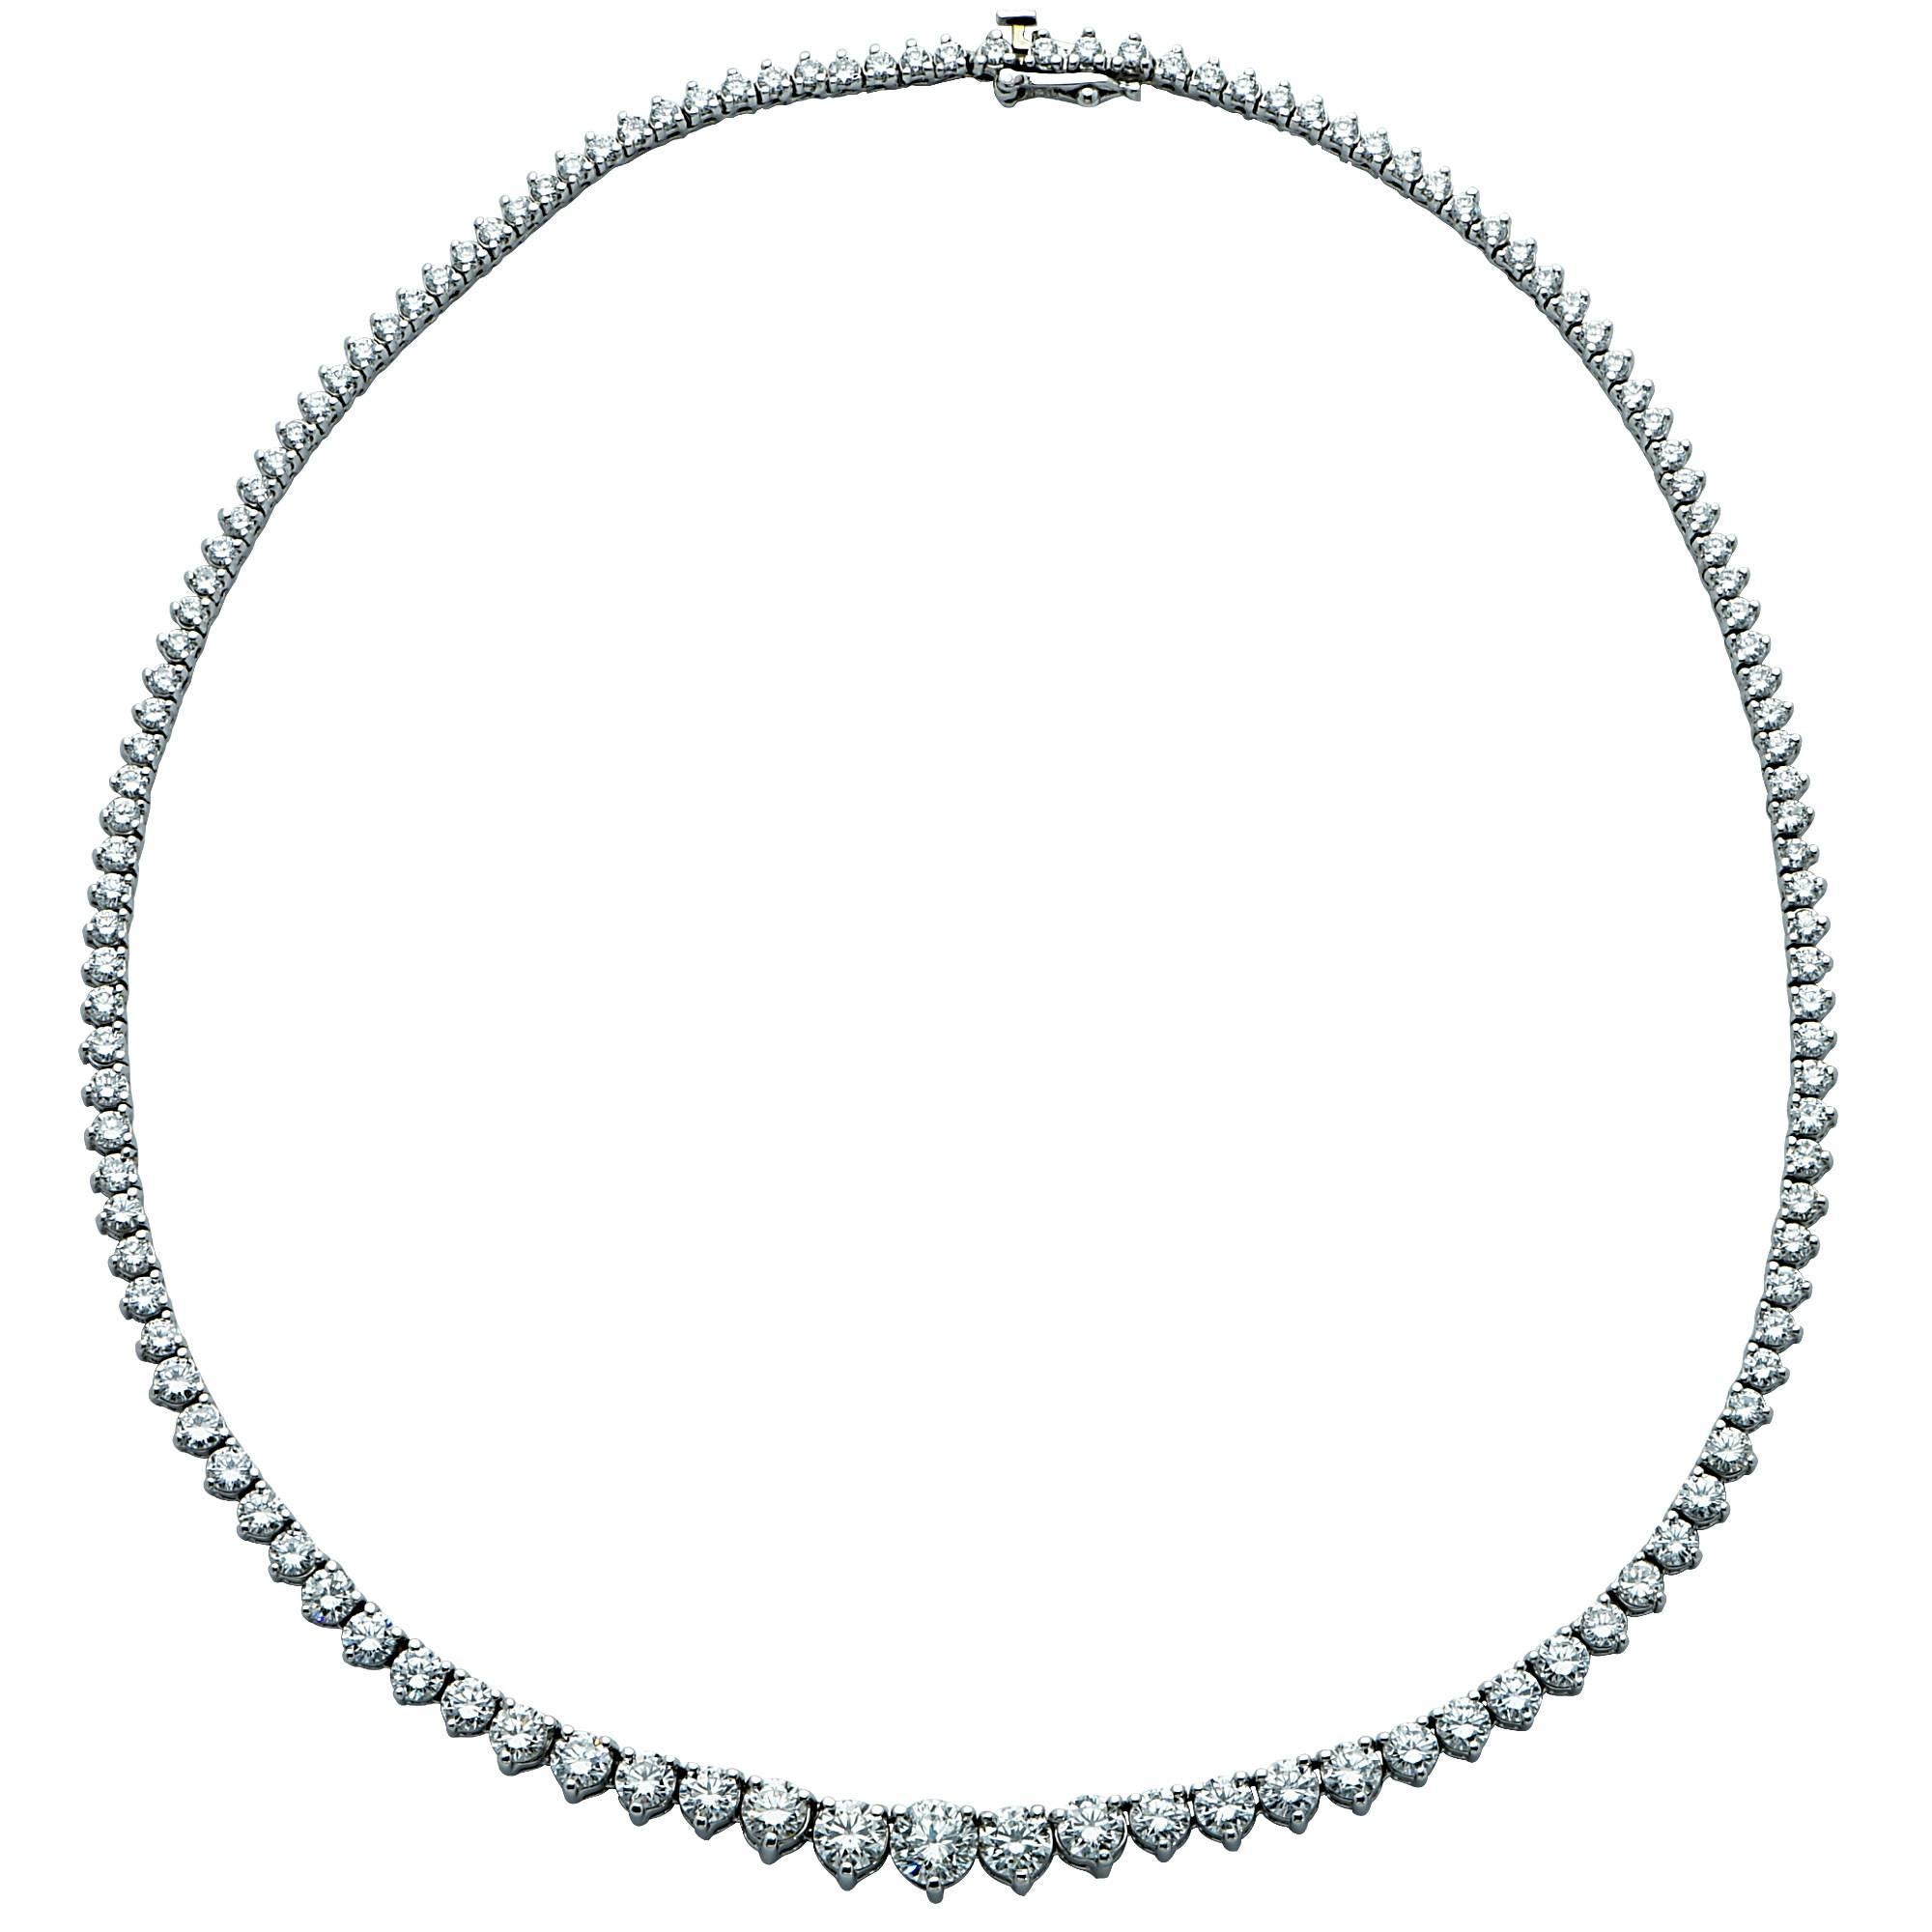 This stunning graduated platinum diamond necklace features approximately 13.50cts total of round brilliant cut diamonds G-H color VS-SI clarity. This riviera necklace is 16.25 inches long, measuring approximately 6.97 mm at its thickest point, and